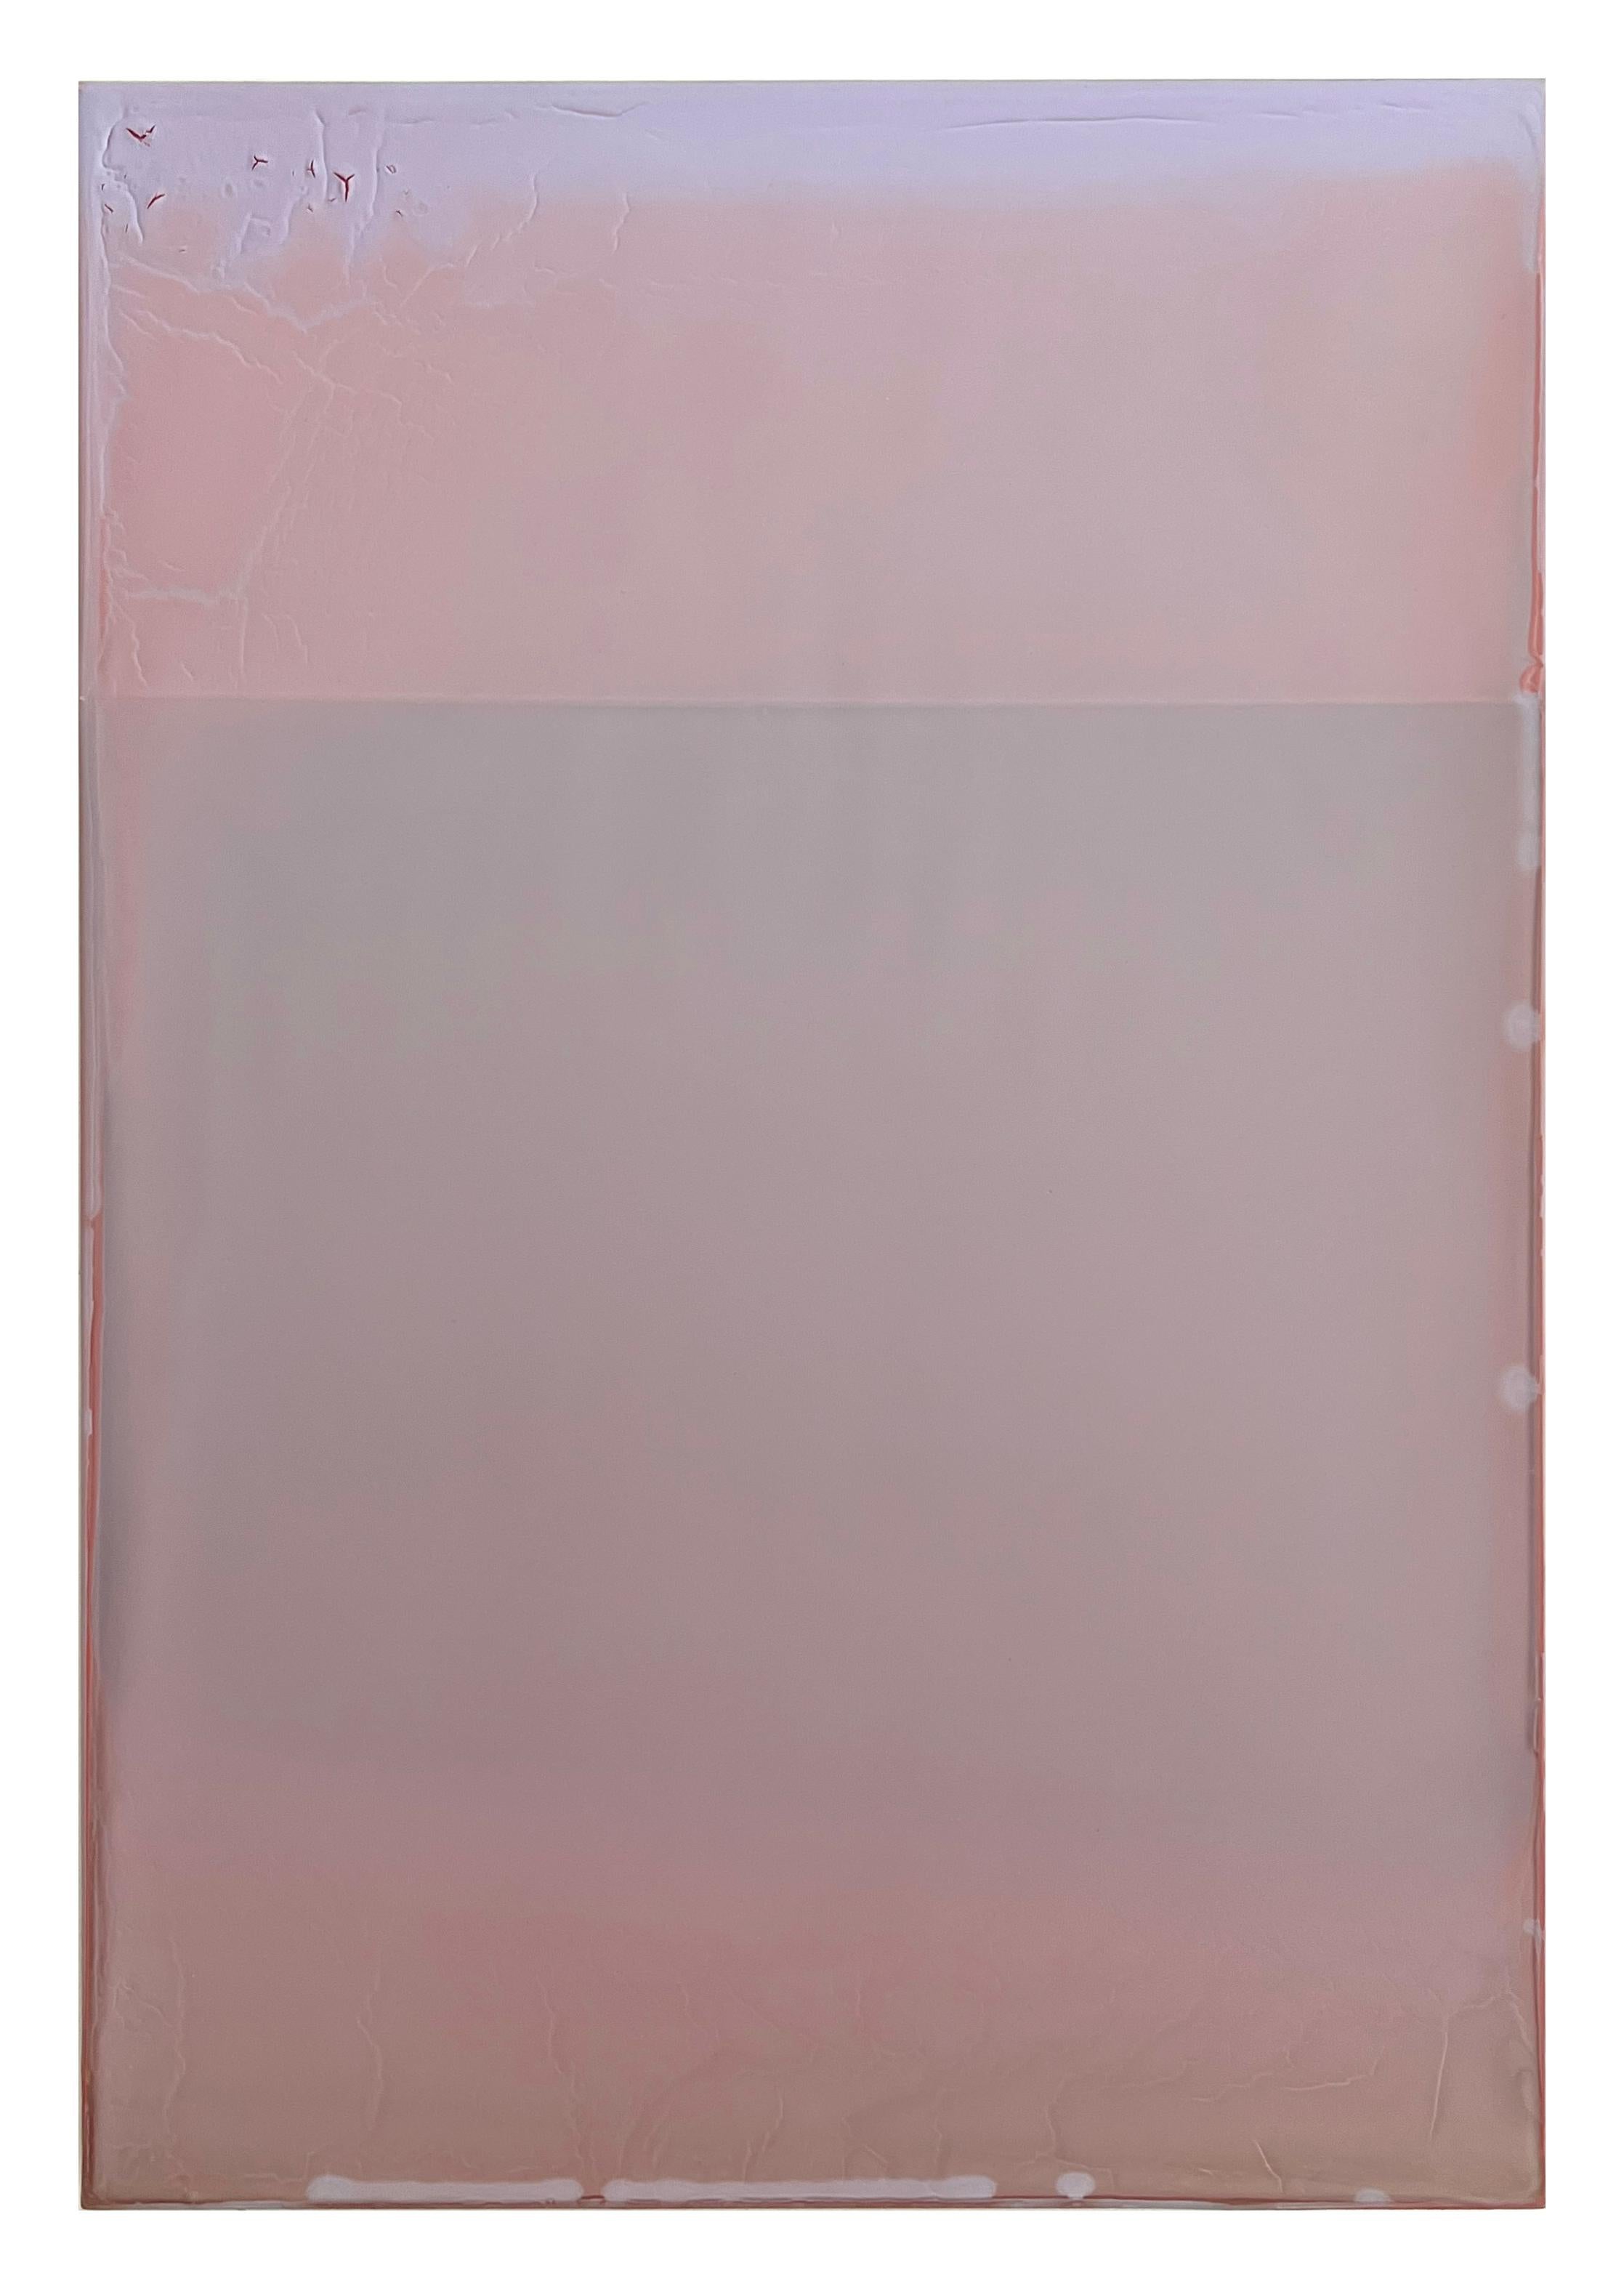 Susan English Abstract Painting - Weather Five, Light Peach Pink, Lilac Tinted Polymer Painting on Floating Panel